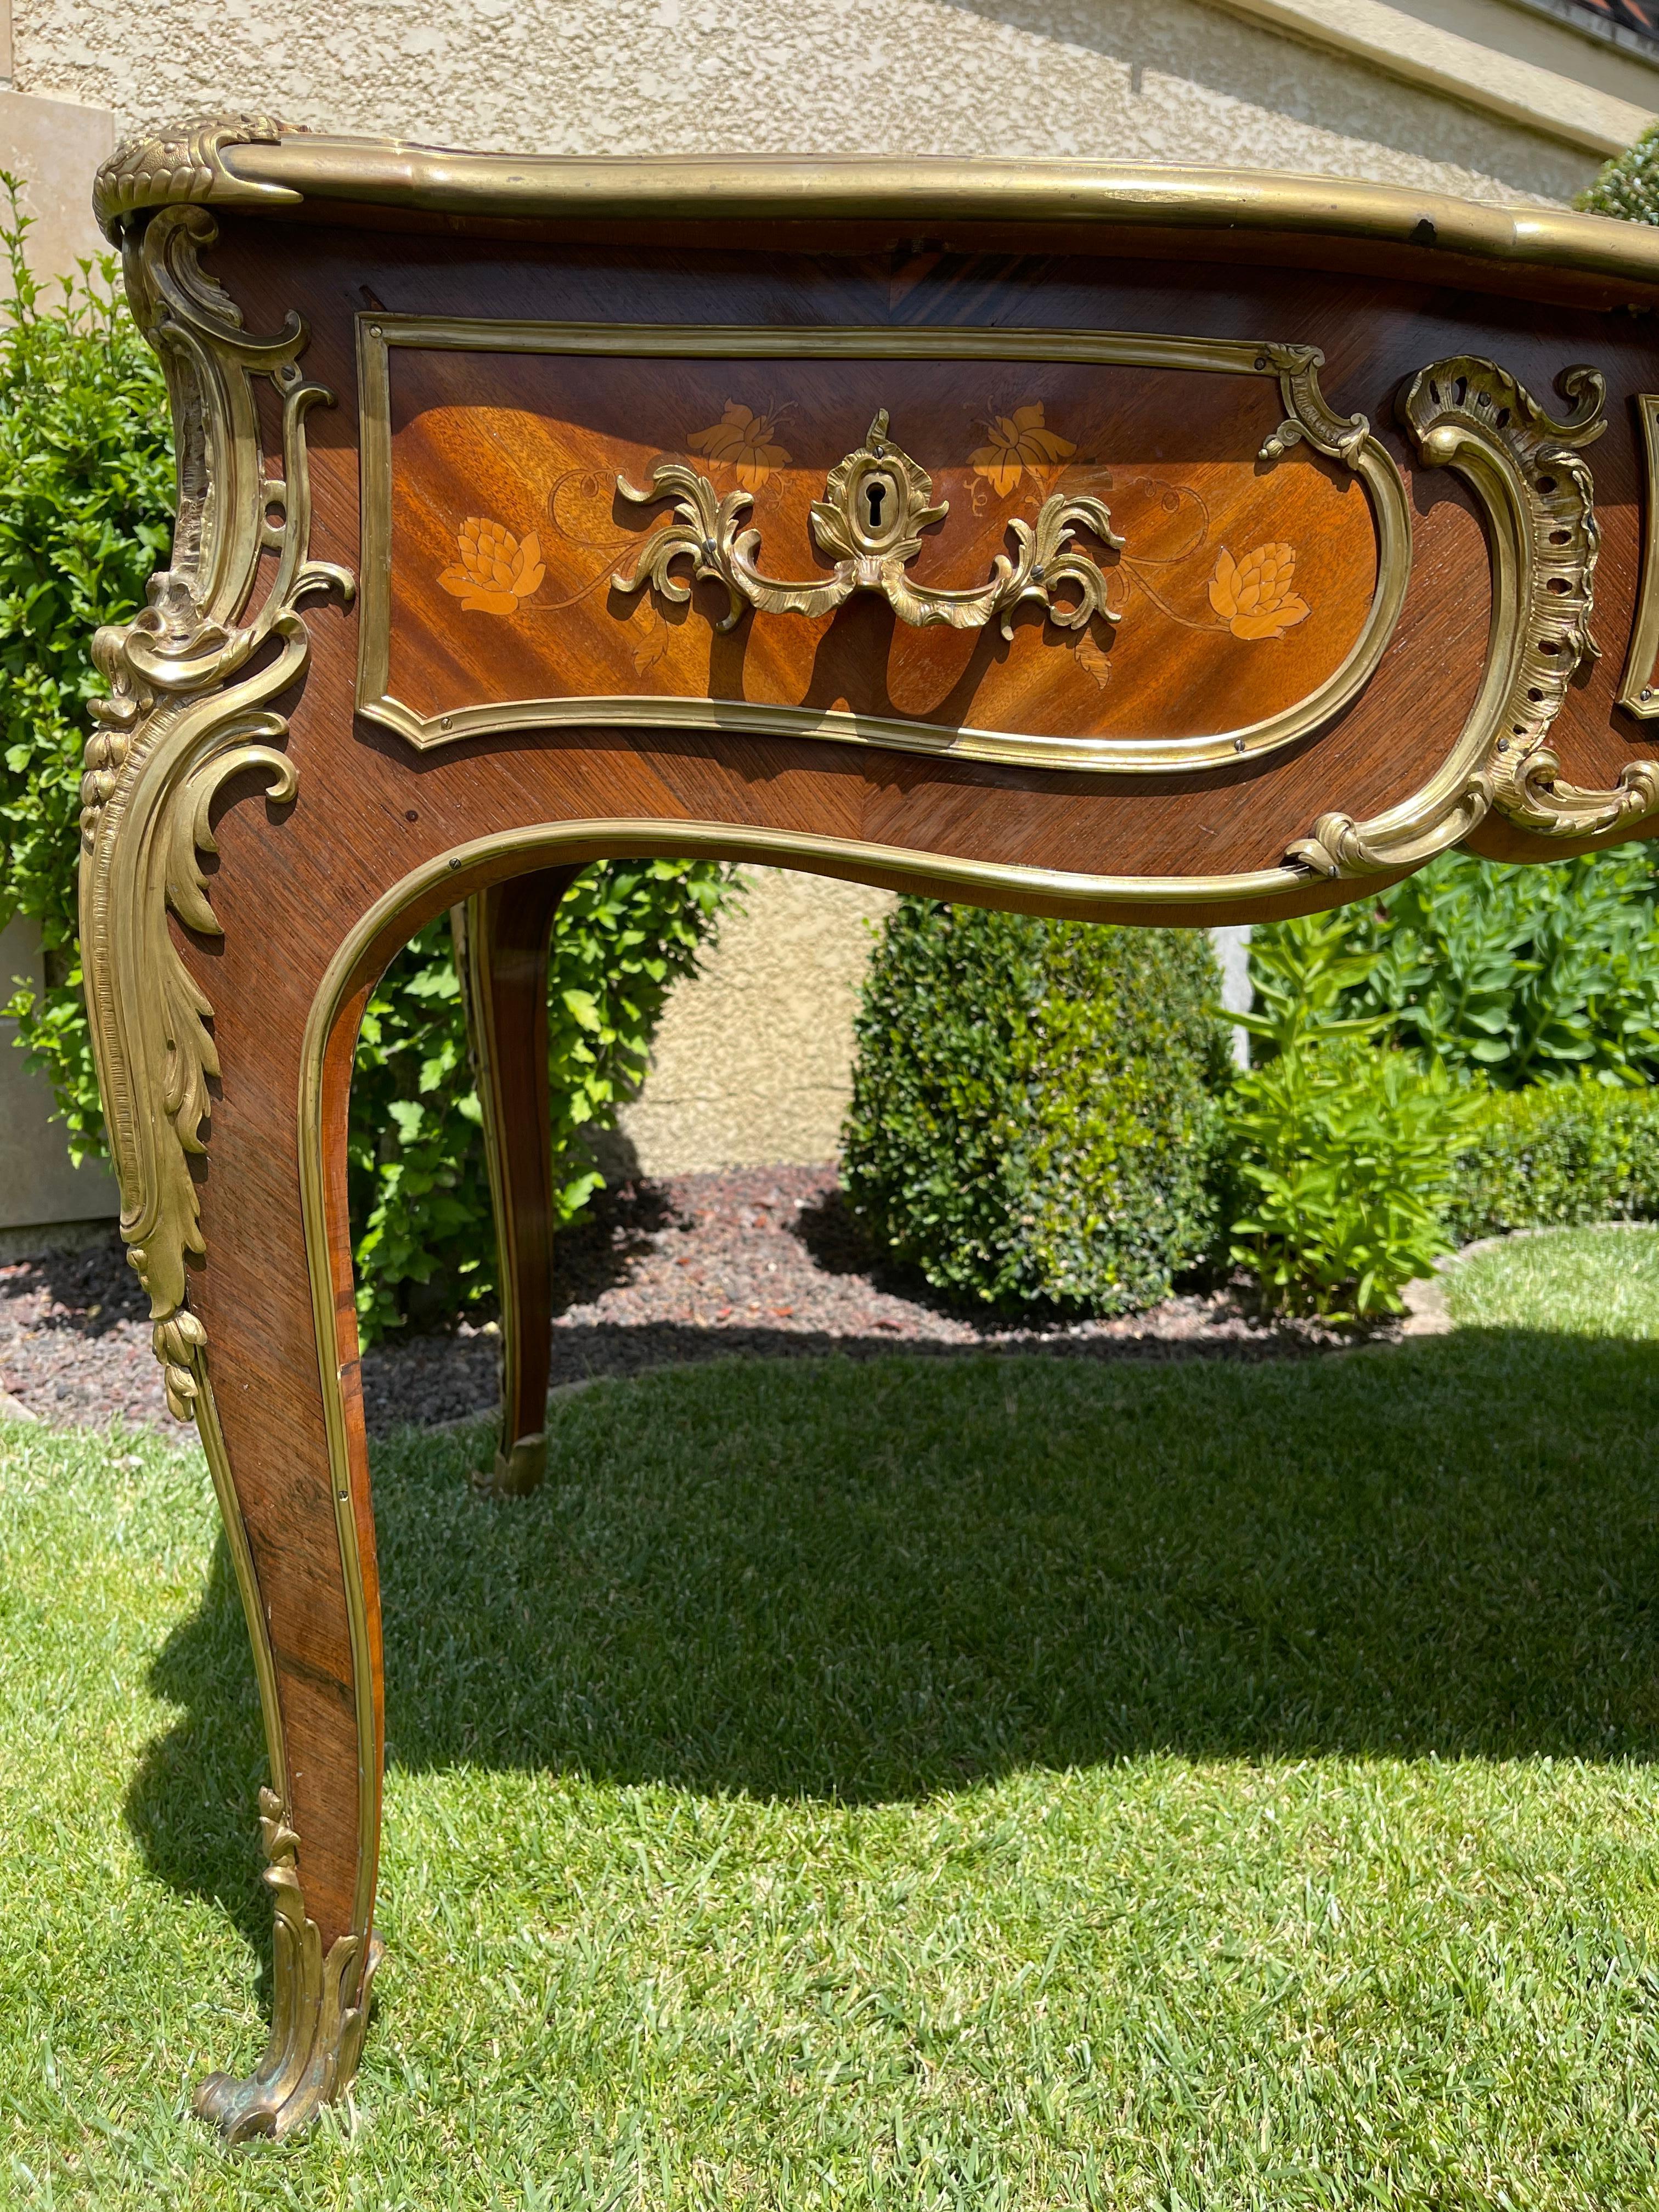 Beautiful flat Louis XV style desk. It is inlaid with chiseled golden bronzes. It is double sided so can be placed in the center of a room. On one side, it has 3 drawers and the leather on the tray is to be changed.
Signed inside a drawer 